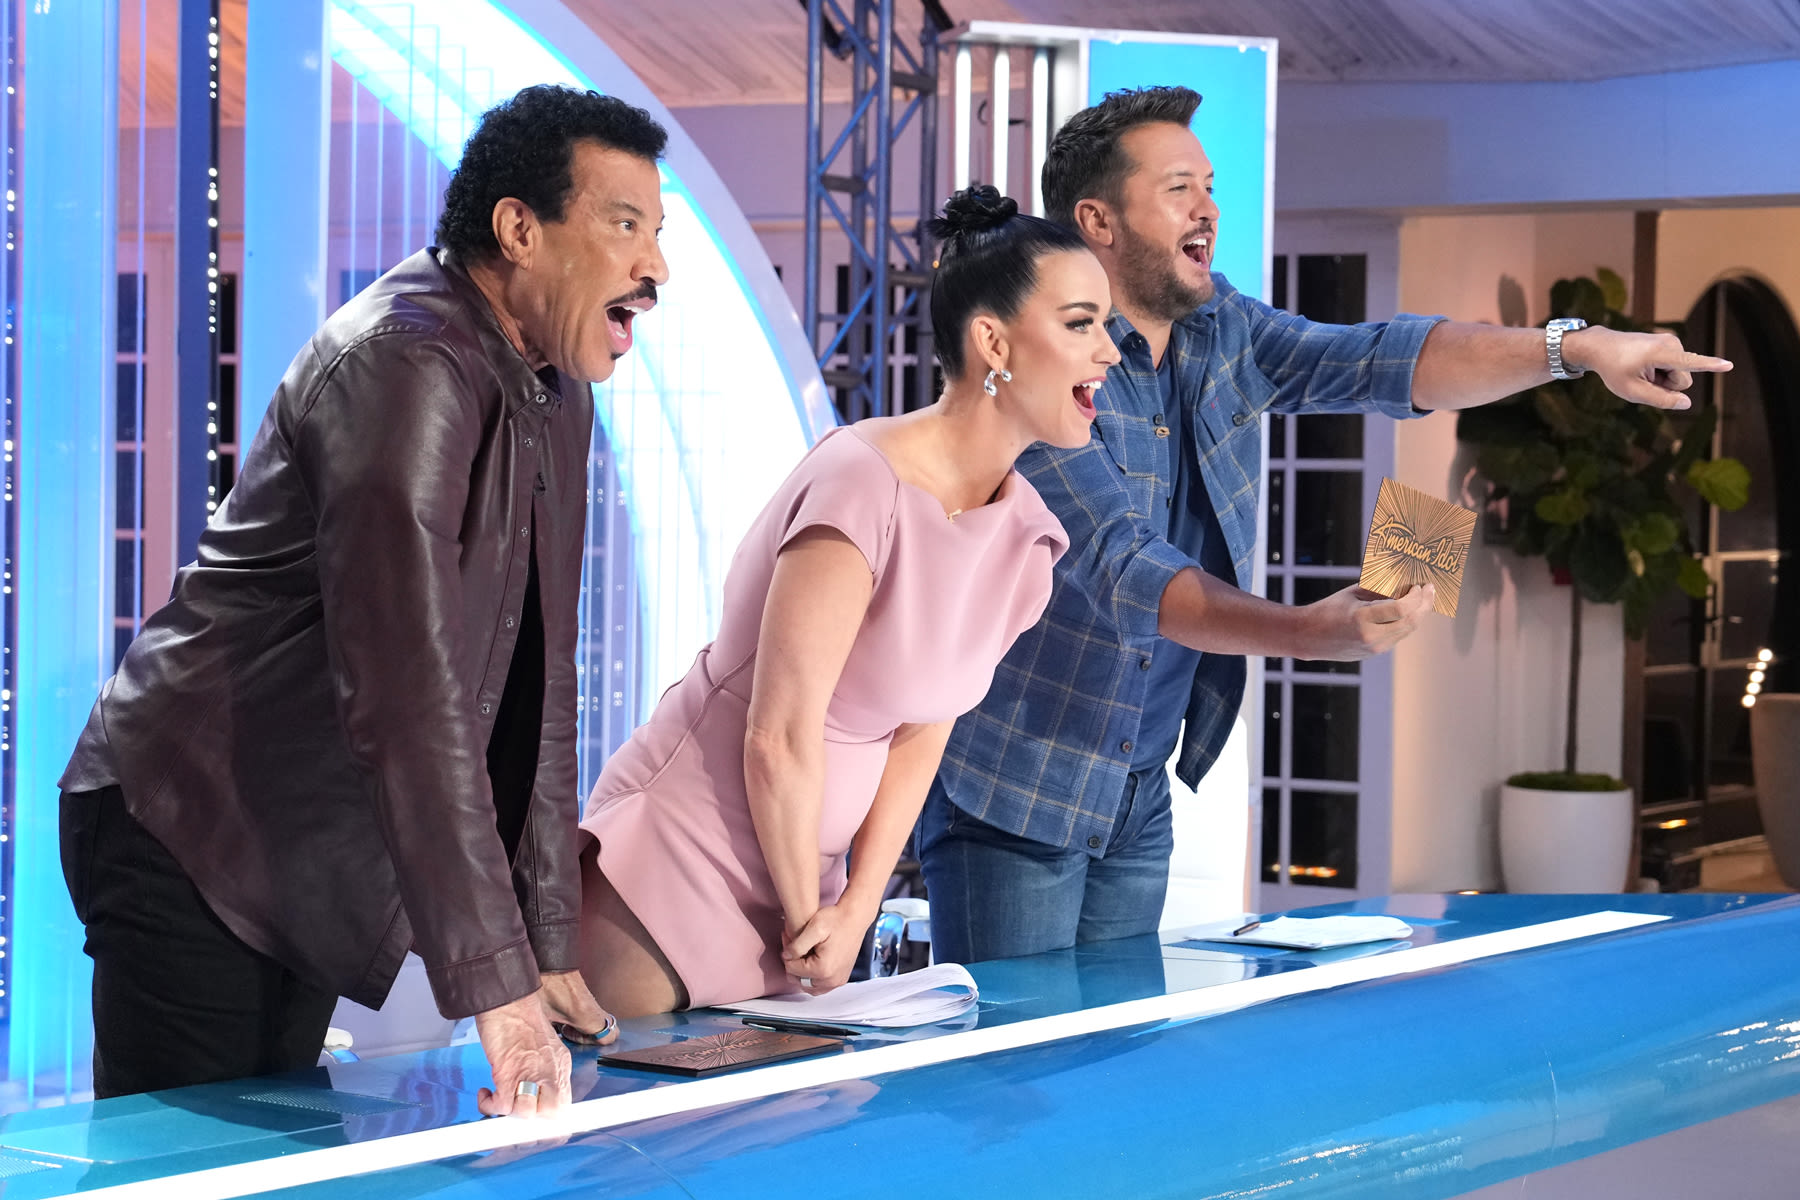 How to Watch the ‘American Idol’ Finale Online Without Cable